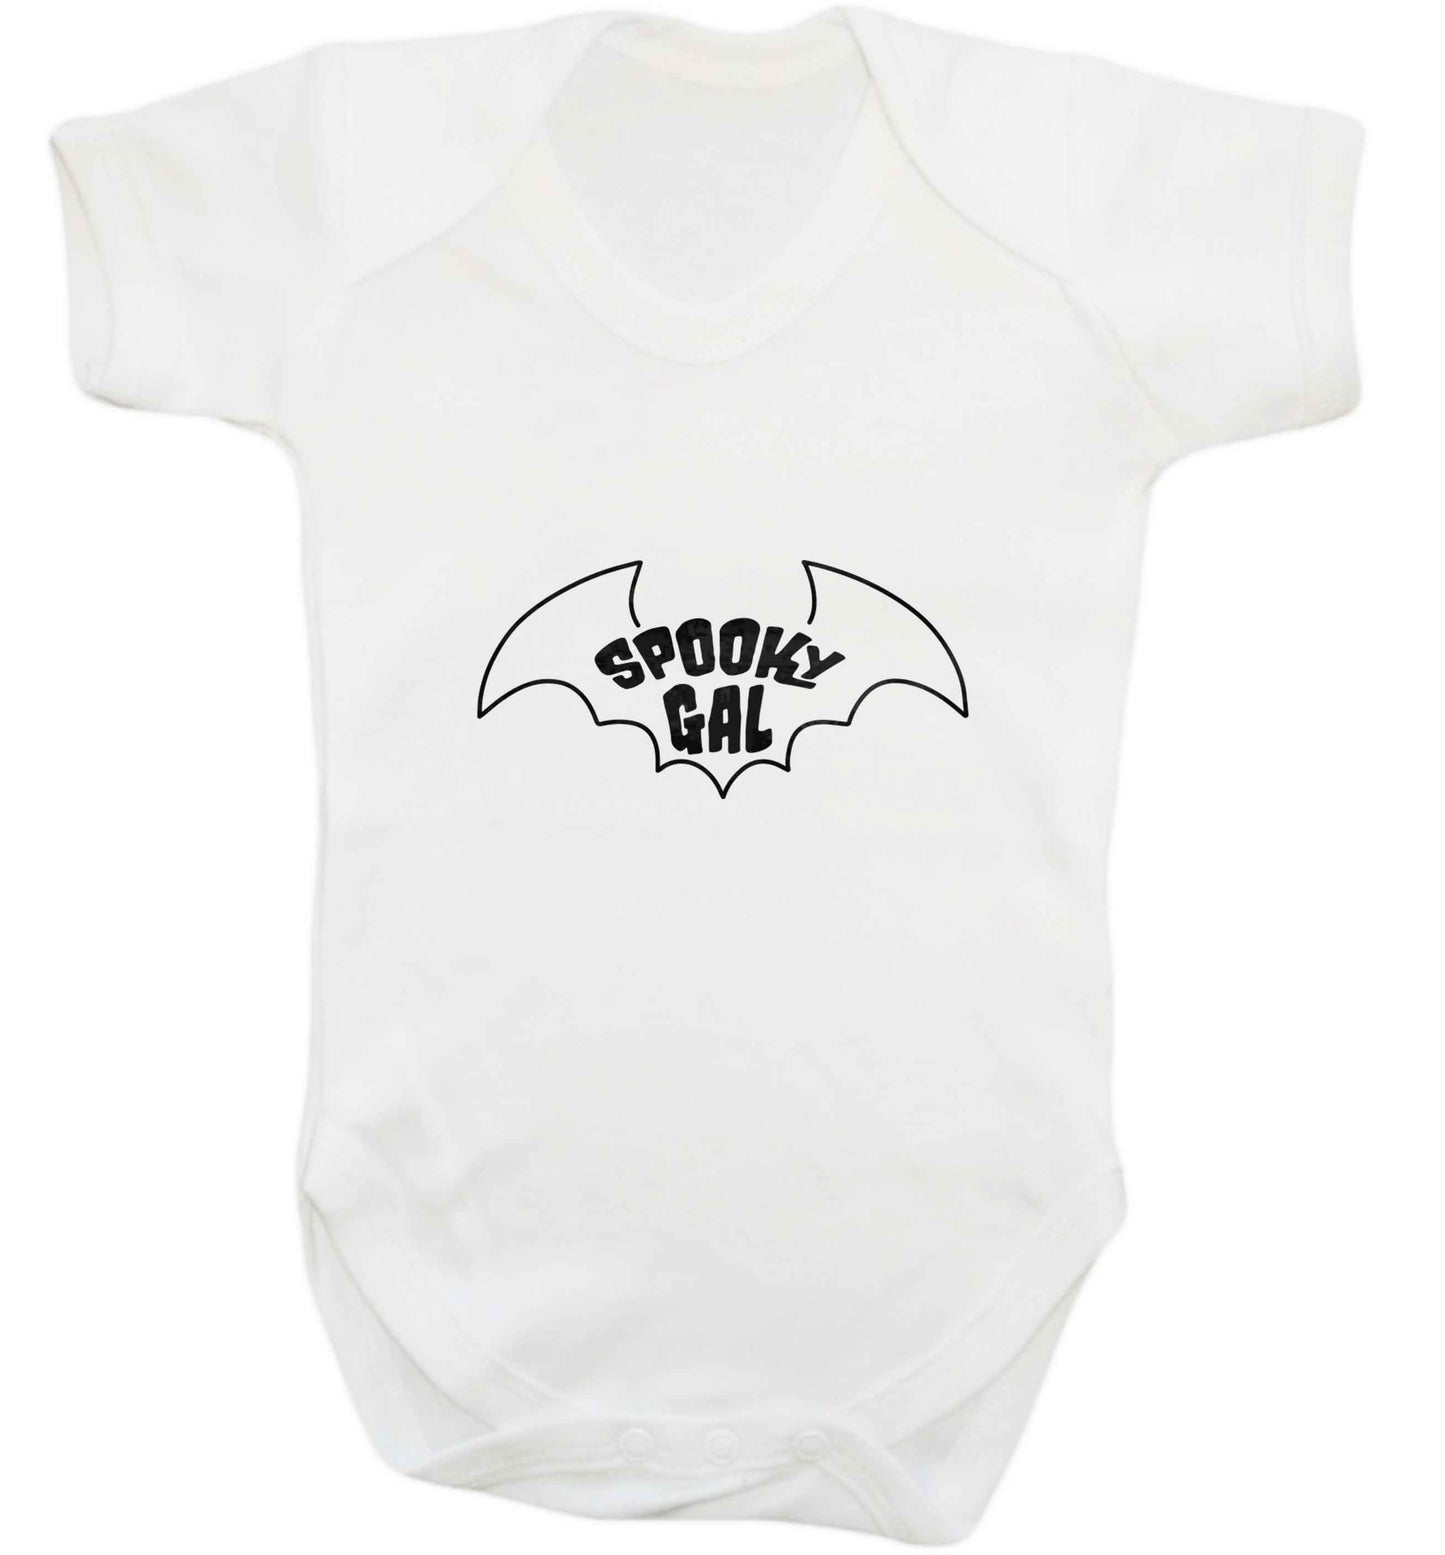 Spooky gal Kit baby vest white 18-24 months